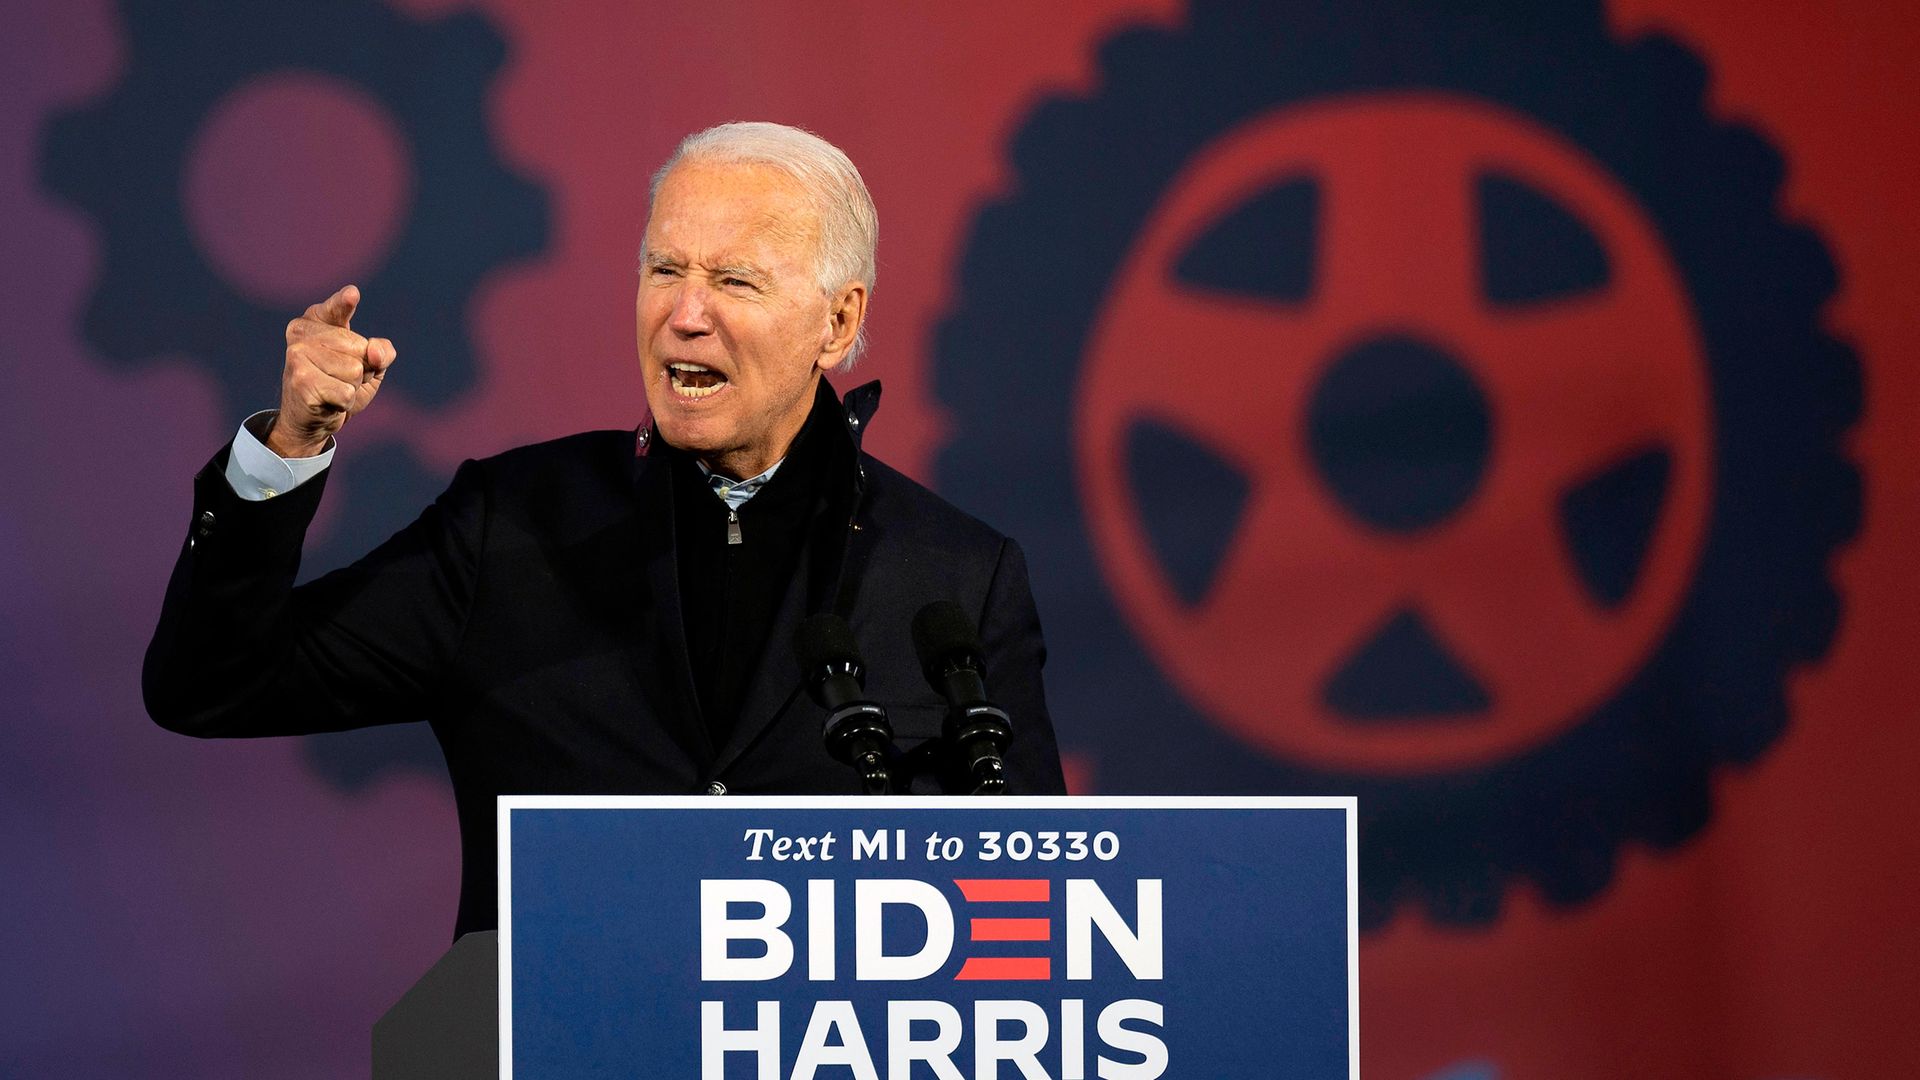 Joe Biden speaks at a car rally at the Michigan State Fairgrounds in Detroit - Credit: AFP via Getty Images